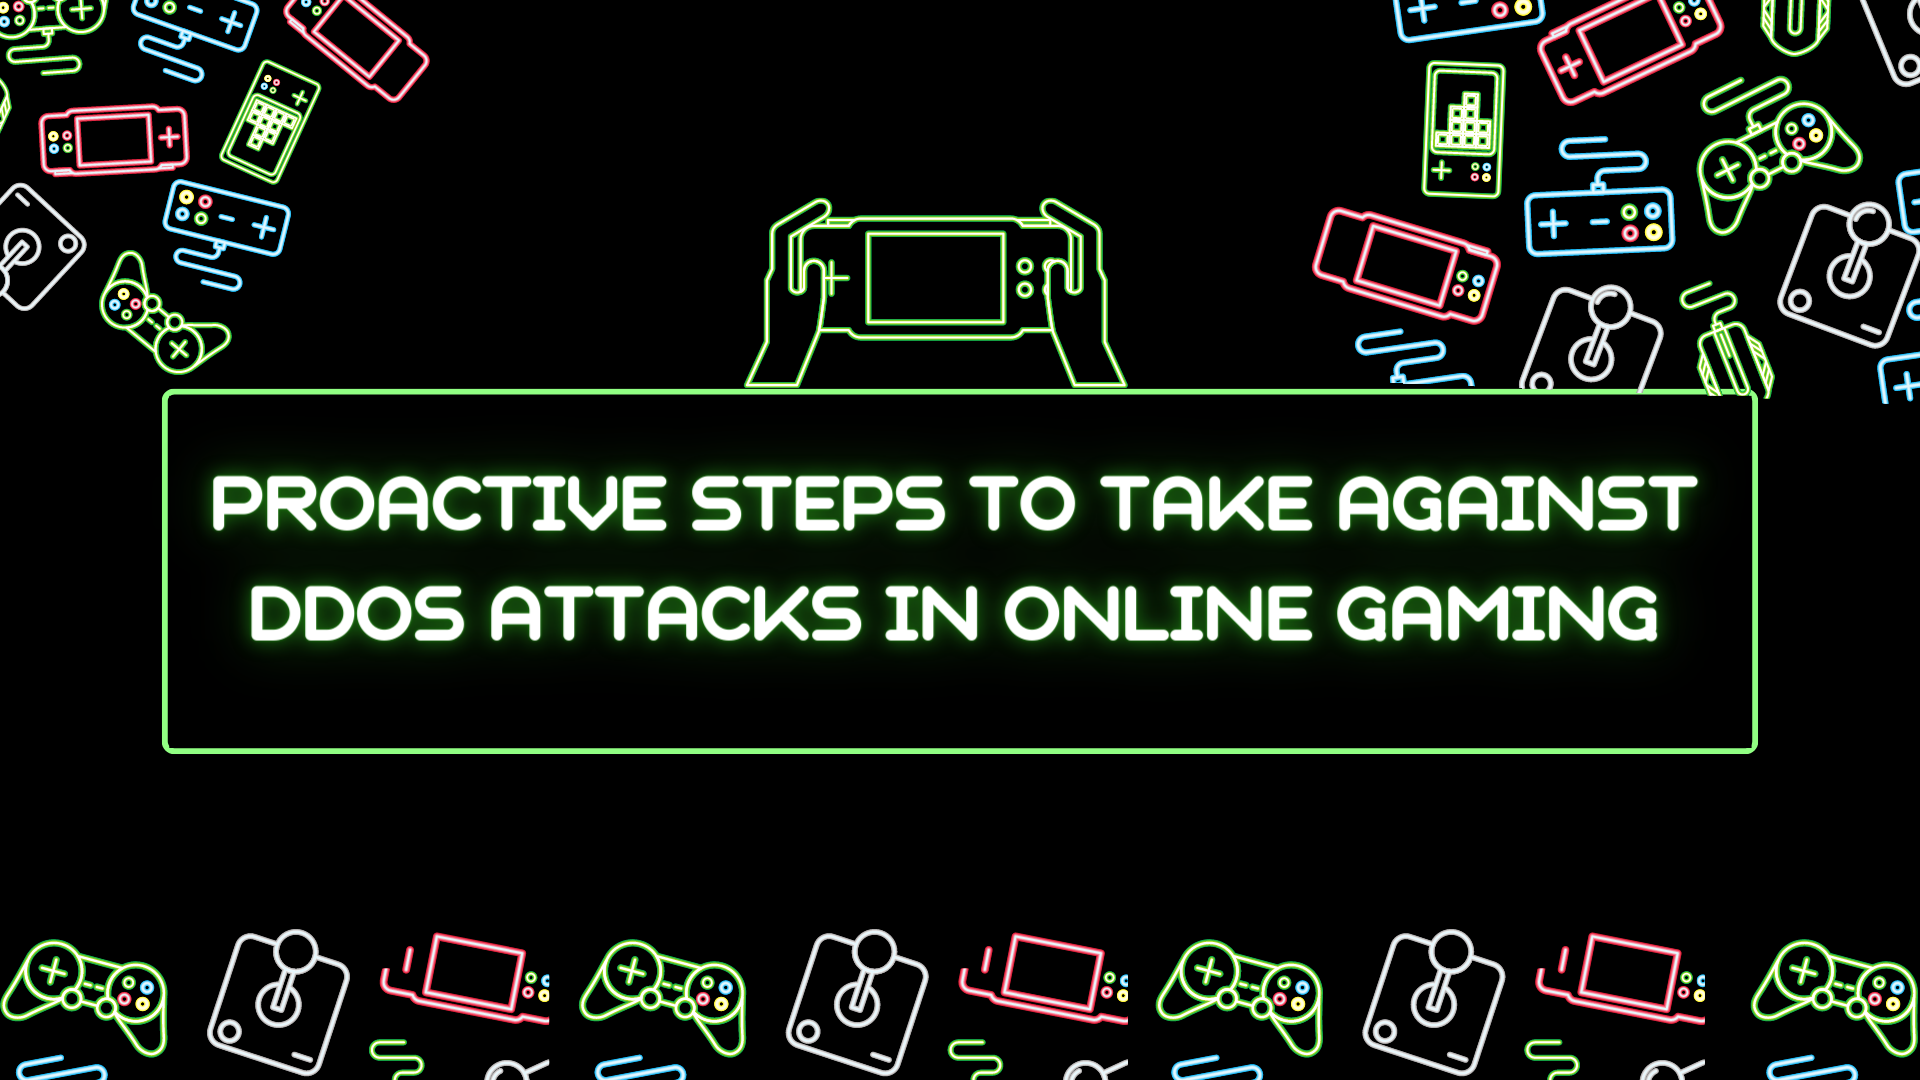 Proactive Steps to Take Against DDoS Attacks in Online Gaming